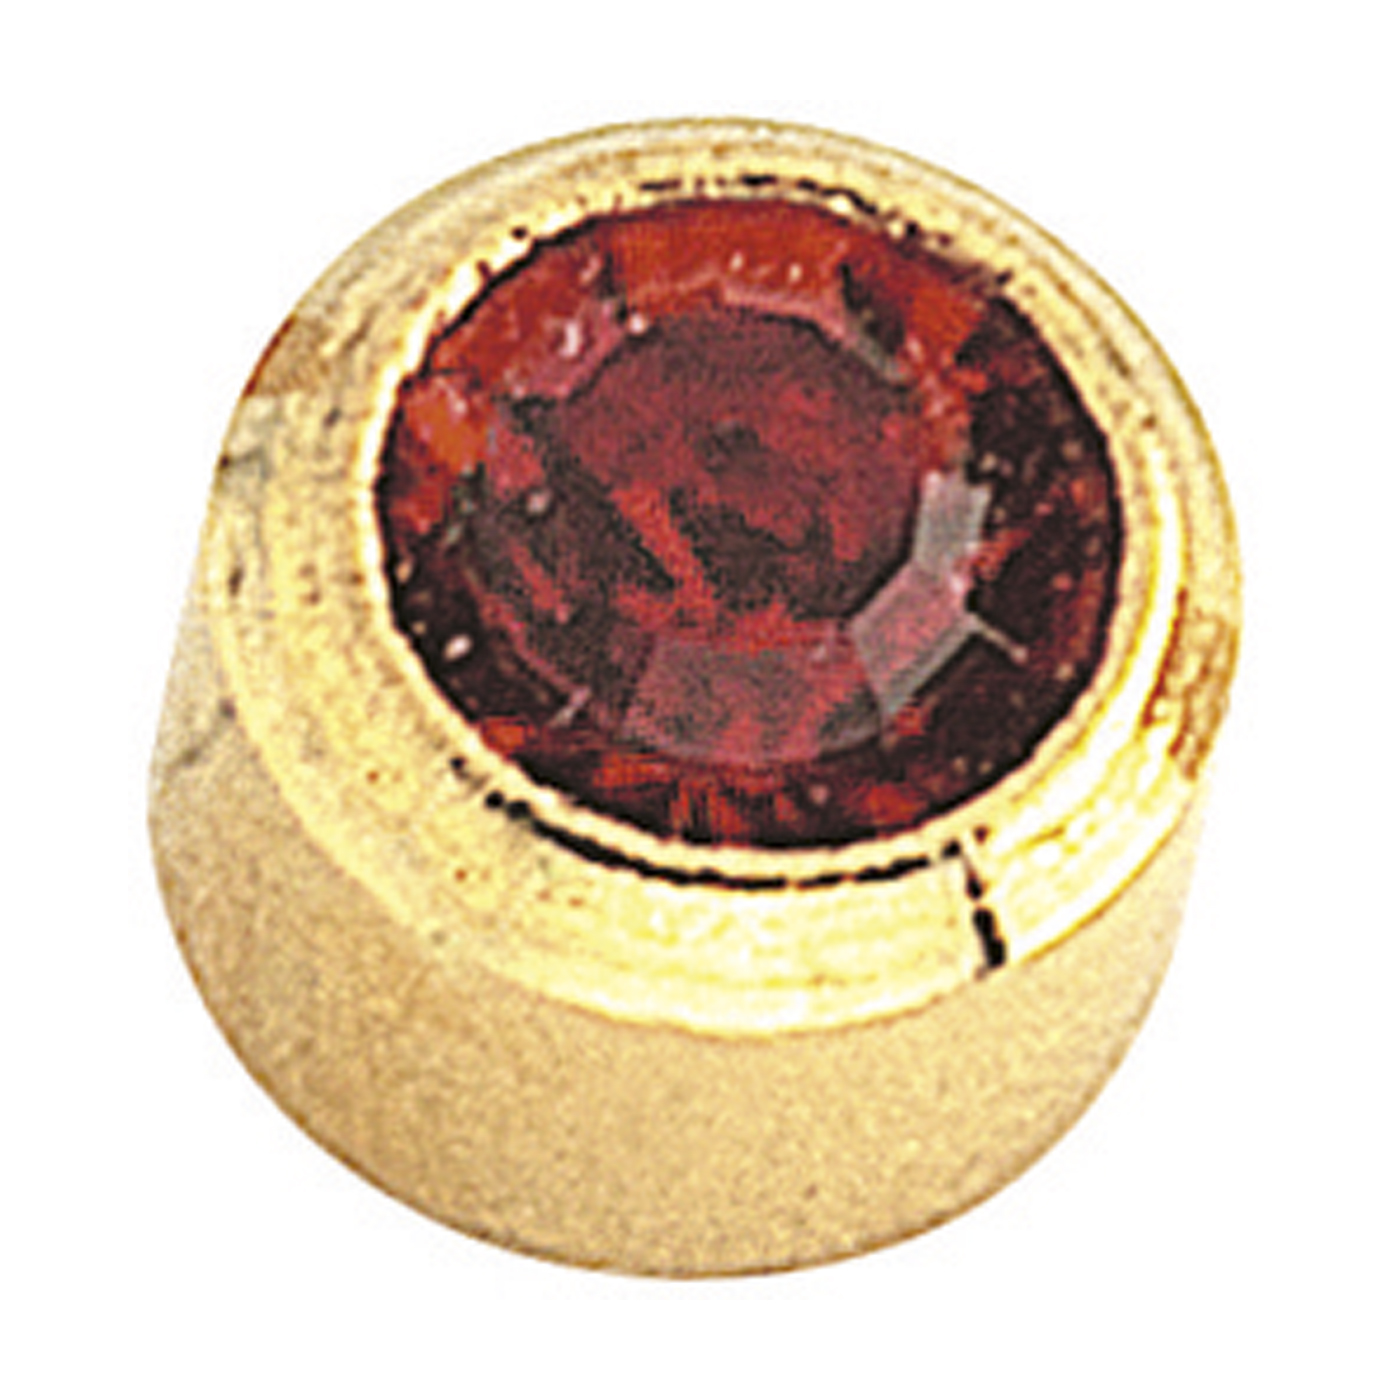 Plus System First Studs, Gold-Plated, Ruby, ø 3.95 mm - 12 x 2 pieces